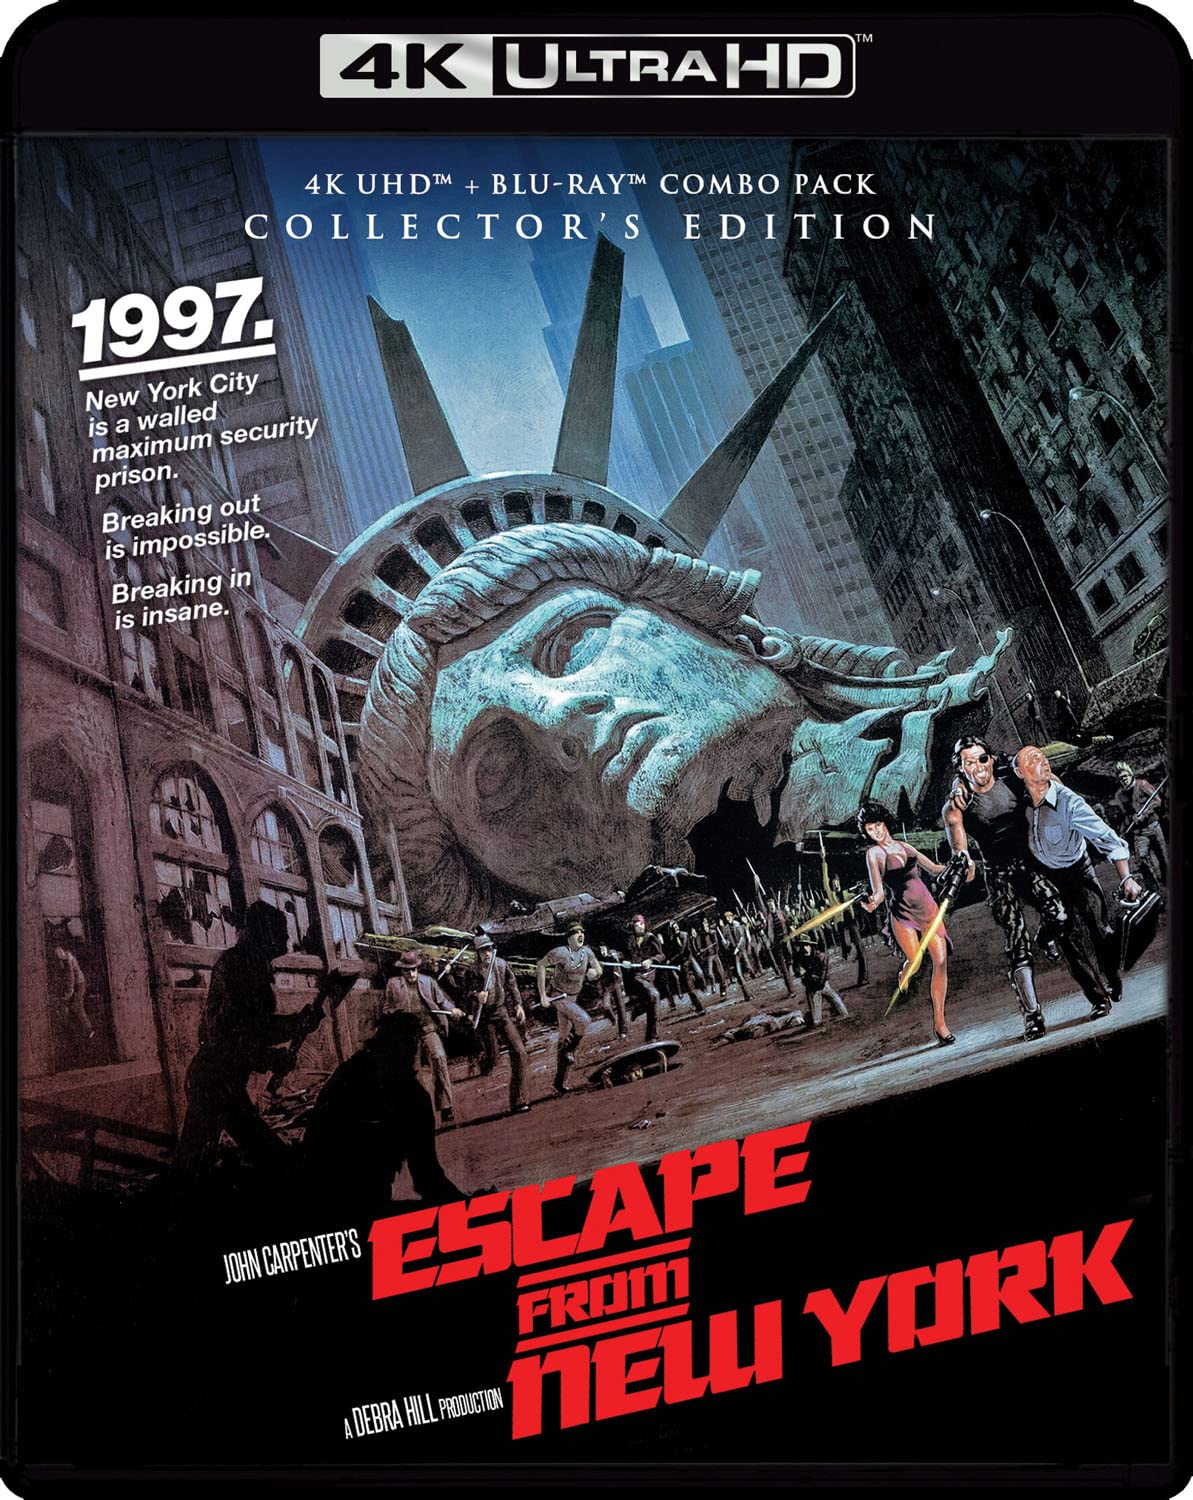 Escape from New York 4k Blu-ray Collectors Edition